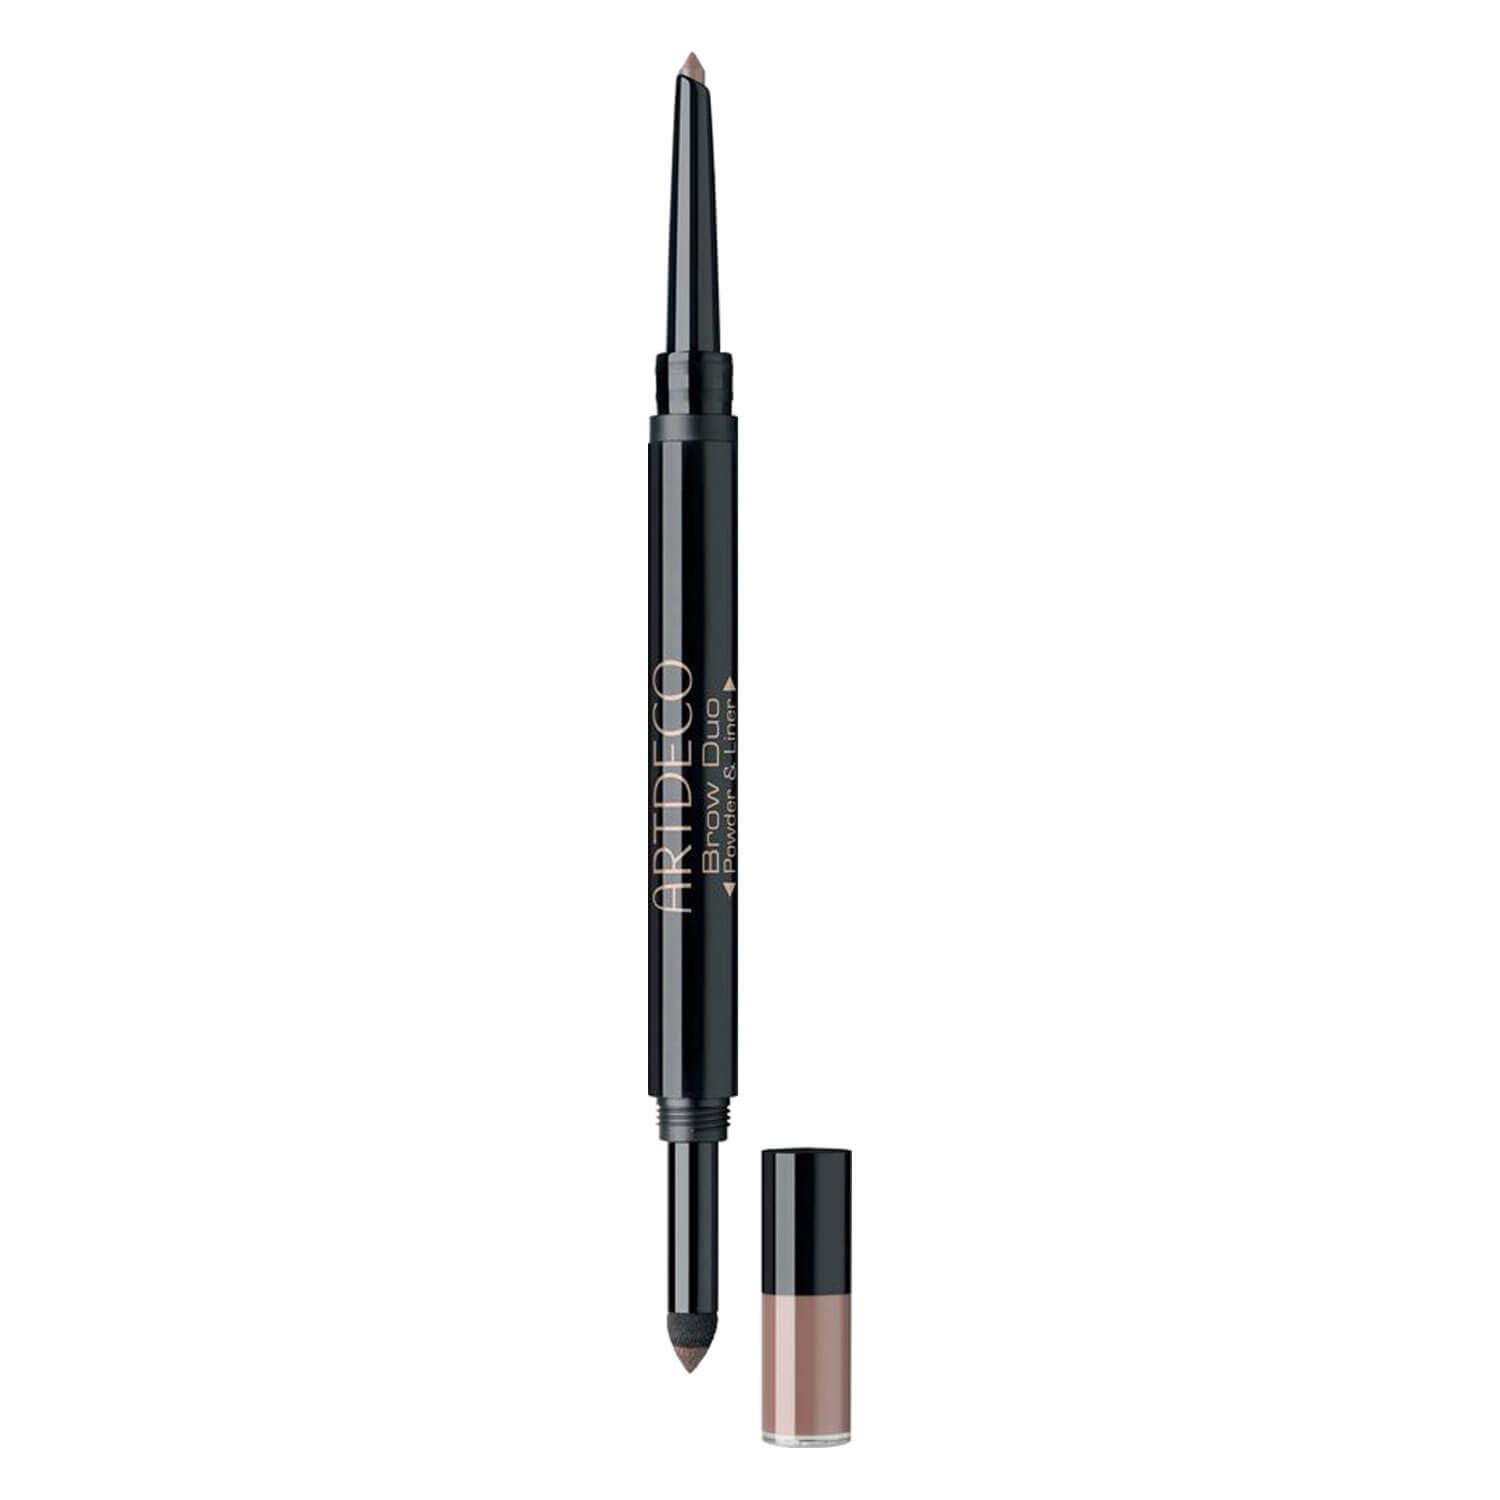 Artdeco Brows - Brow Duo Powder & Liner Gold Taupe 28